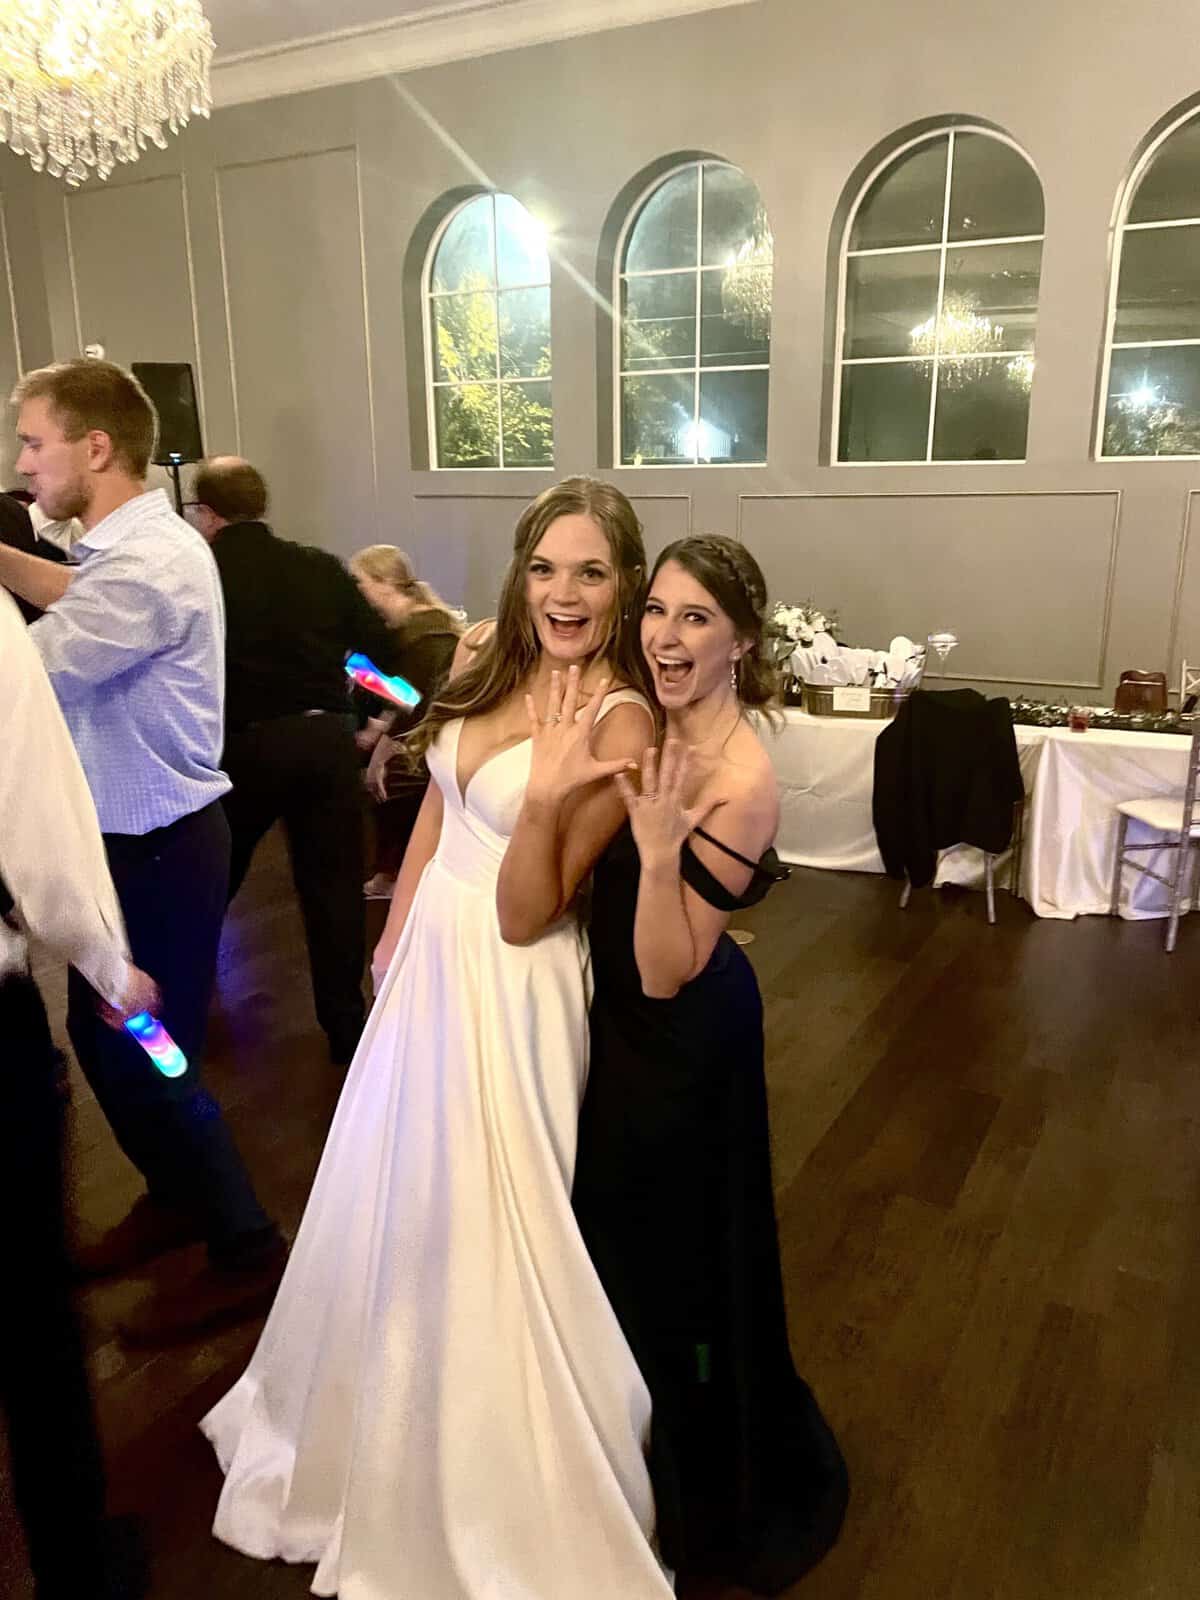 A bride and her bridesmaid showing their ring fingers to the camera.